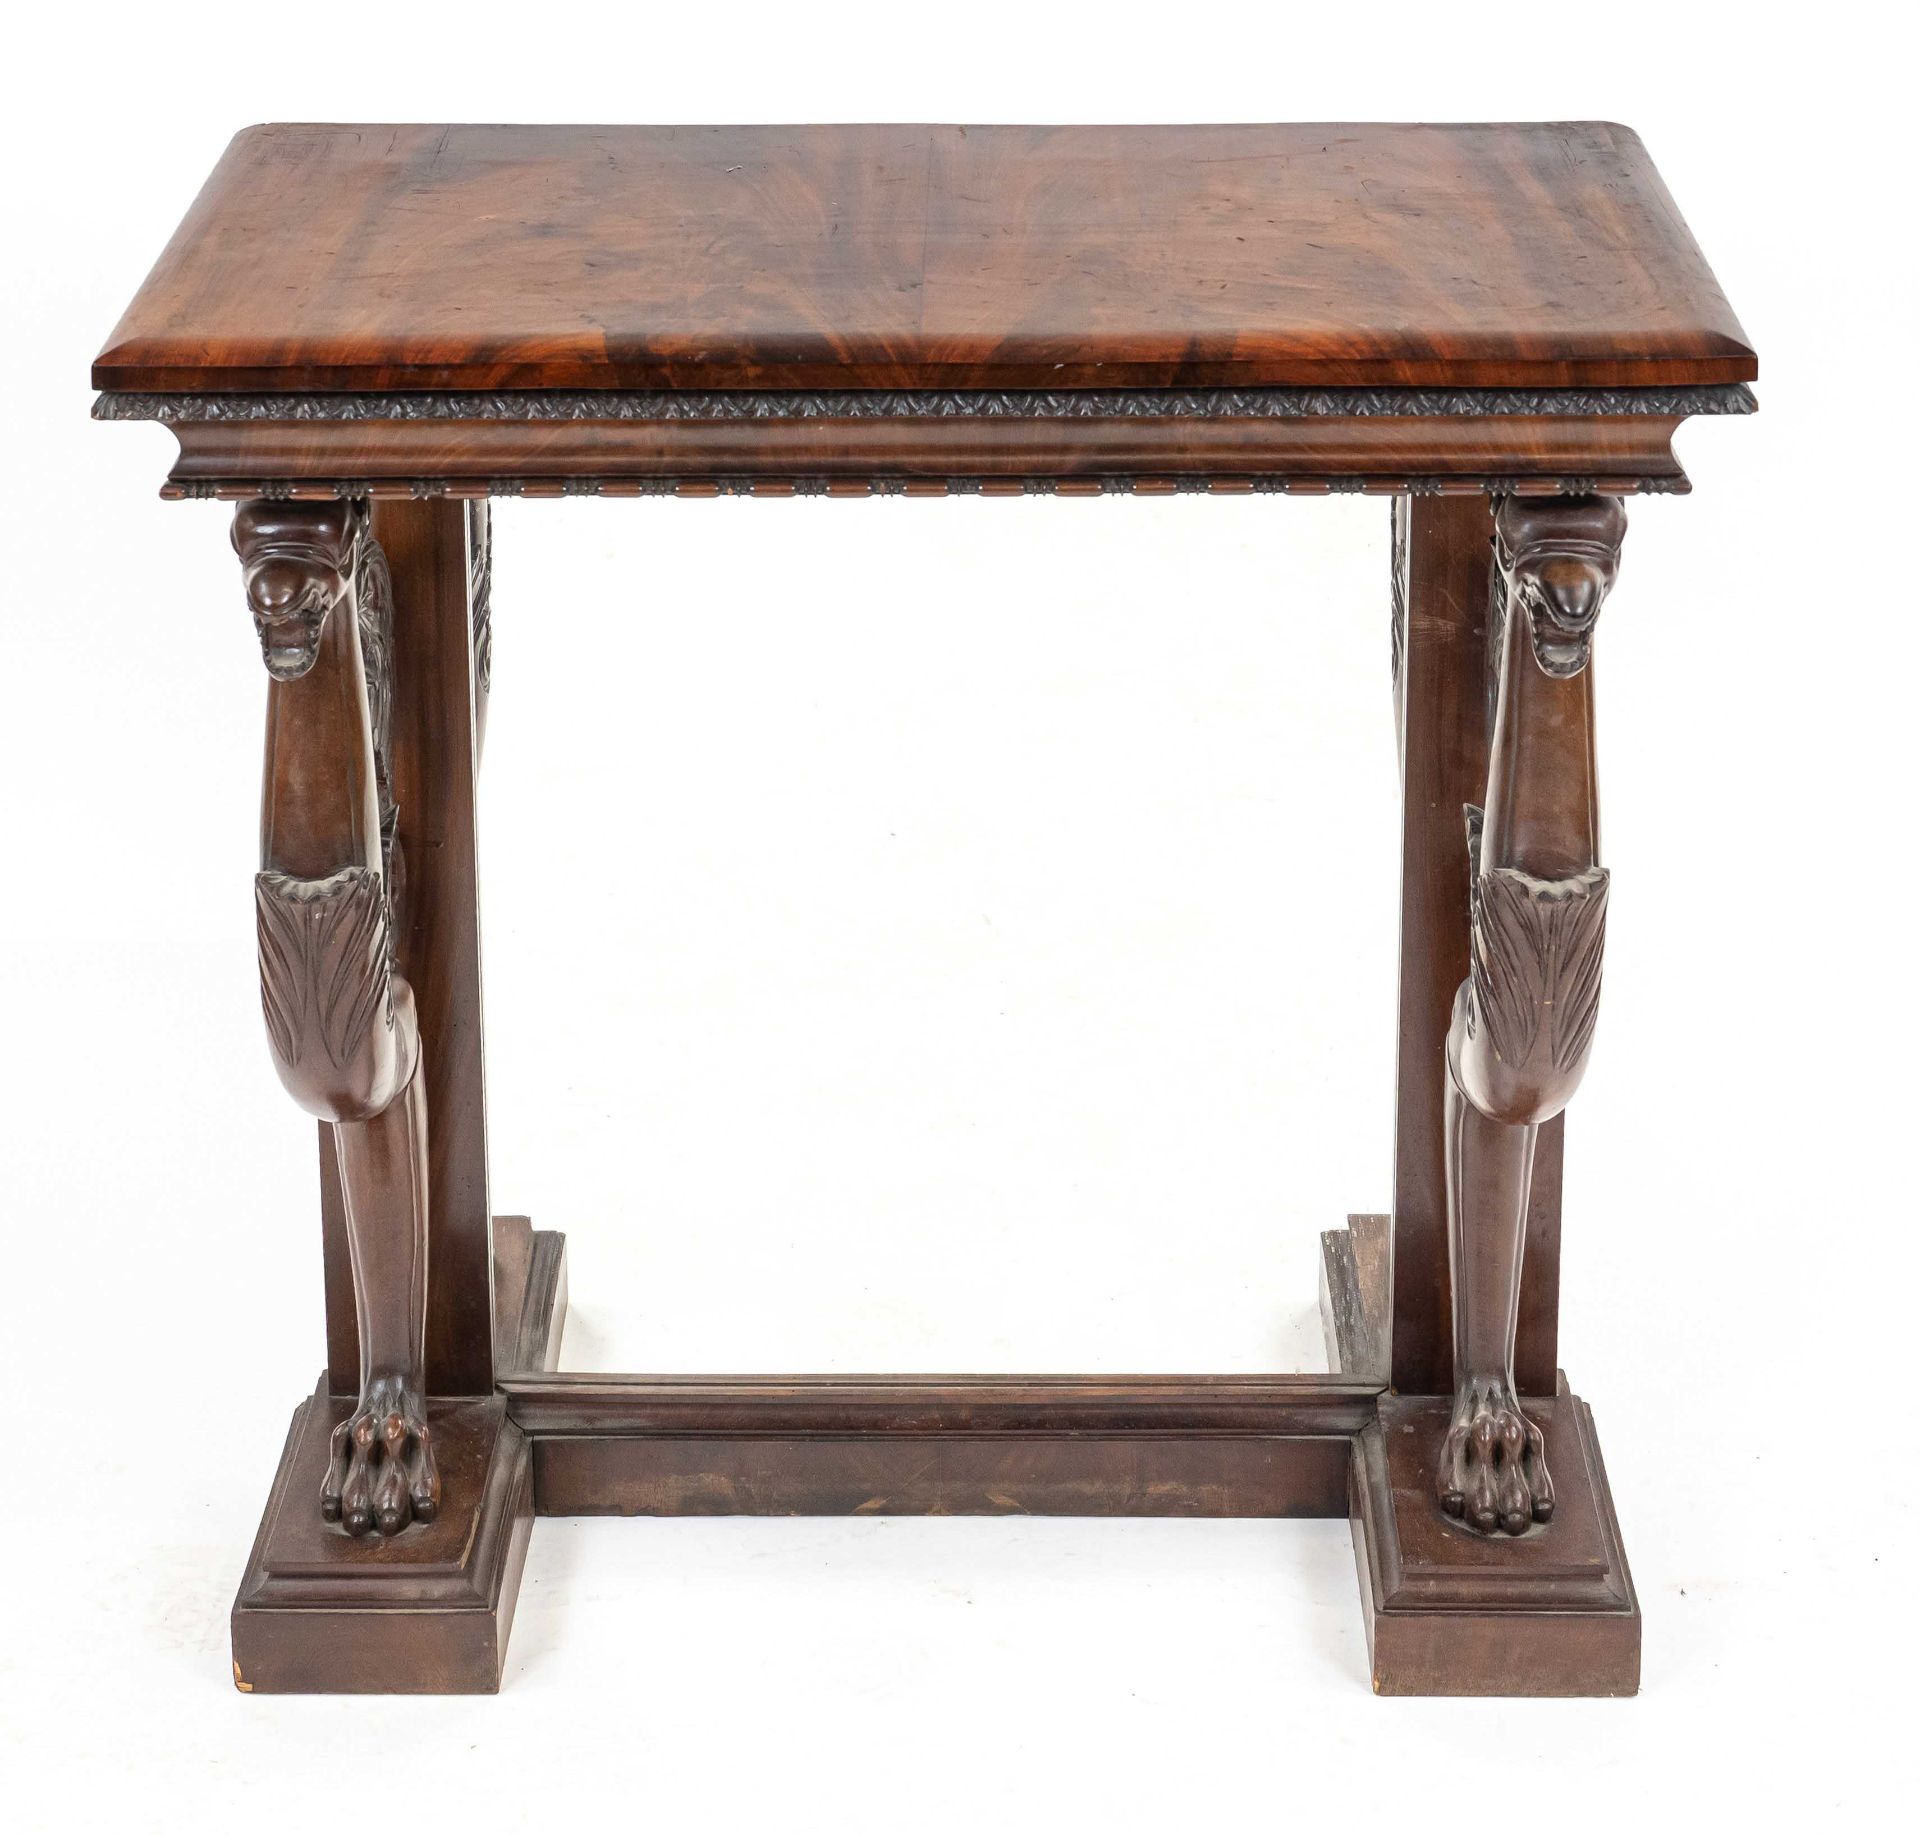 Console table, late Biedermeier c. 1850, solid mahogany, fully carved mythical creatures, mirrored